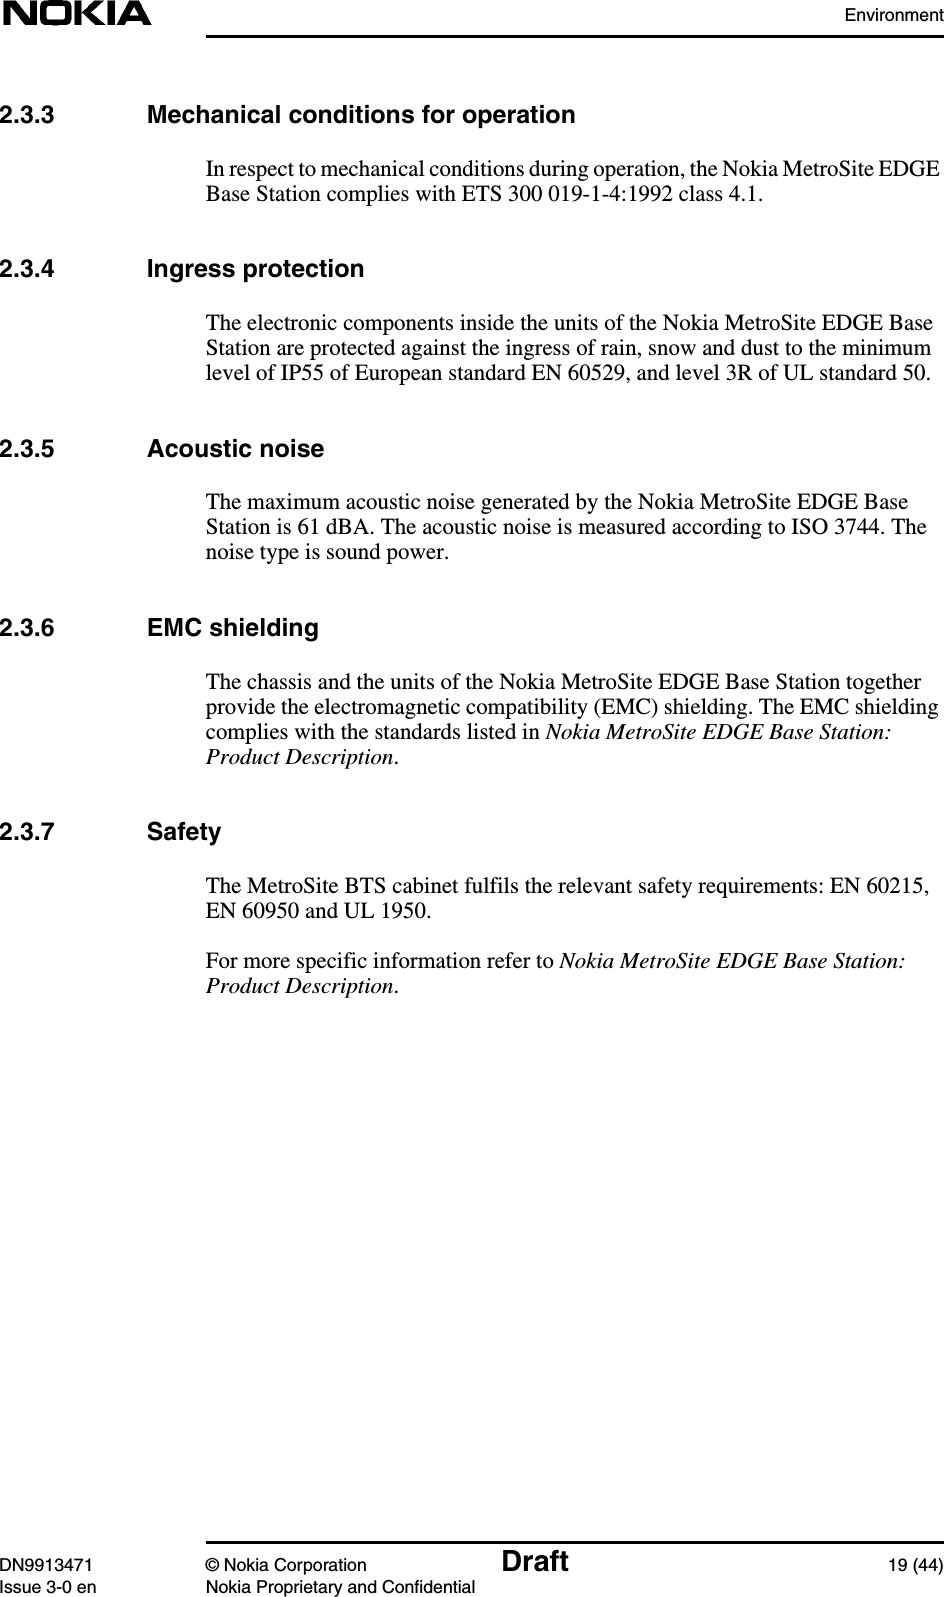 EnvironmentDN9913471 © Nokia Corporation Draft 19 (44)Issue 3-0 en Nokia Proprietary and Confidential2.3.3 Mechanical conditions for operationIn respect to mechanical conditions during operation, the Nokia MetroSite EDGEBase Station complies with ETS 300 019-1-4:1992 class 4.1.2.3.4 Ingress protectionThe electronic components inside the units of the Nokia MetroSite EDGE BaseStation are protected against the ingress of rain, snow and dust to the minimumlevel of IP55 of European standard EN 60529, and level 3R of UL standard 50.2.3.5 Acoustic noiseThe maximum acoustic noise generated by the Nokia MetroSite EDGE BaseStation is 61 dBA. The acoustic noise is measured according to ISO 3744. Thenoise type is sound power.2.3.6 EMC shieldingThe chassis and the units of the Nokia MetroSite EDGE Base Station togetherprovide the electromagnetic compatibility (EMC) shielding. The EMC shieldingcomplies with the standards listed in Nokia MetroSite EDGE Base Station:Product Description.2.3.7 SafetyThe MetroSite BTS cabinet fulfils the relevant safety requirements: EN 60215,EN 60950 and UL 1950.For more specific information refer to Nokia MetroSite EDGE Base Station:Product Description.